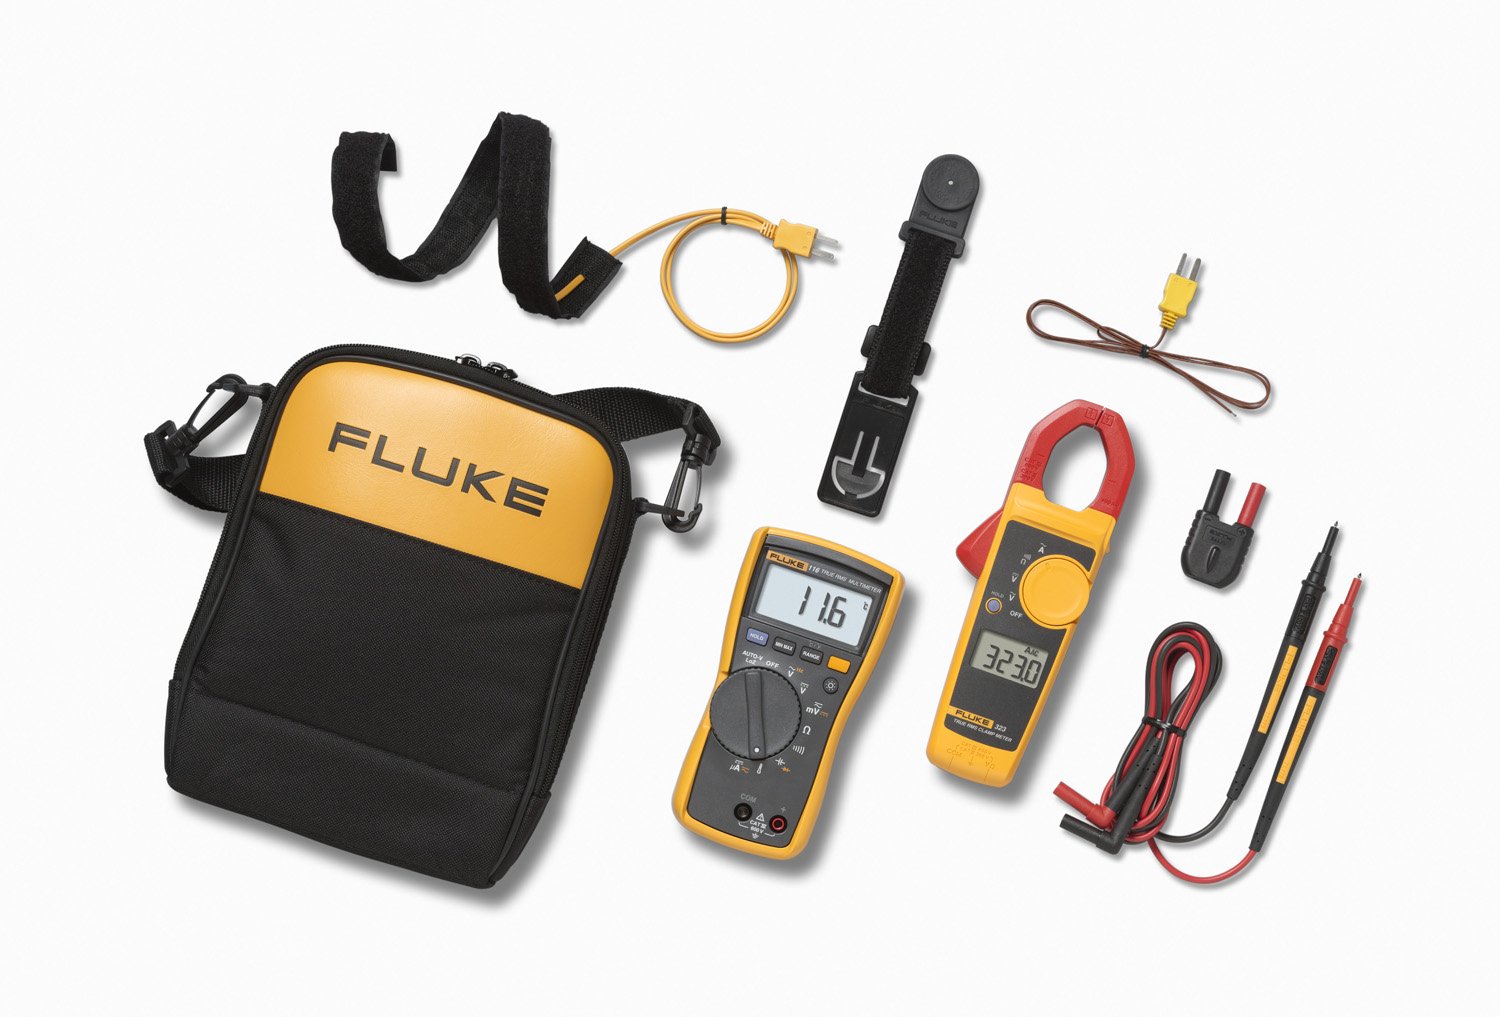 Fluke 116/323 Multimeter and Clamp Meter HVAC Combo Kit, AC/DC Voltage, AC Current 400 A, Microamps To Test Flame Sensors, Includes Temp Probe, Tes...